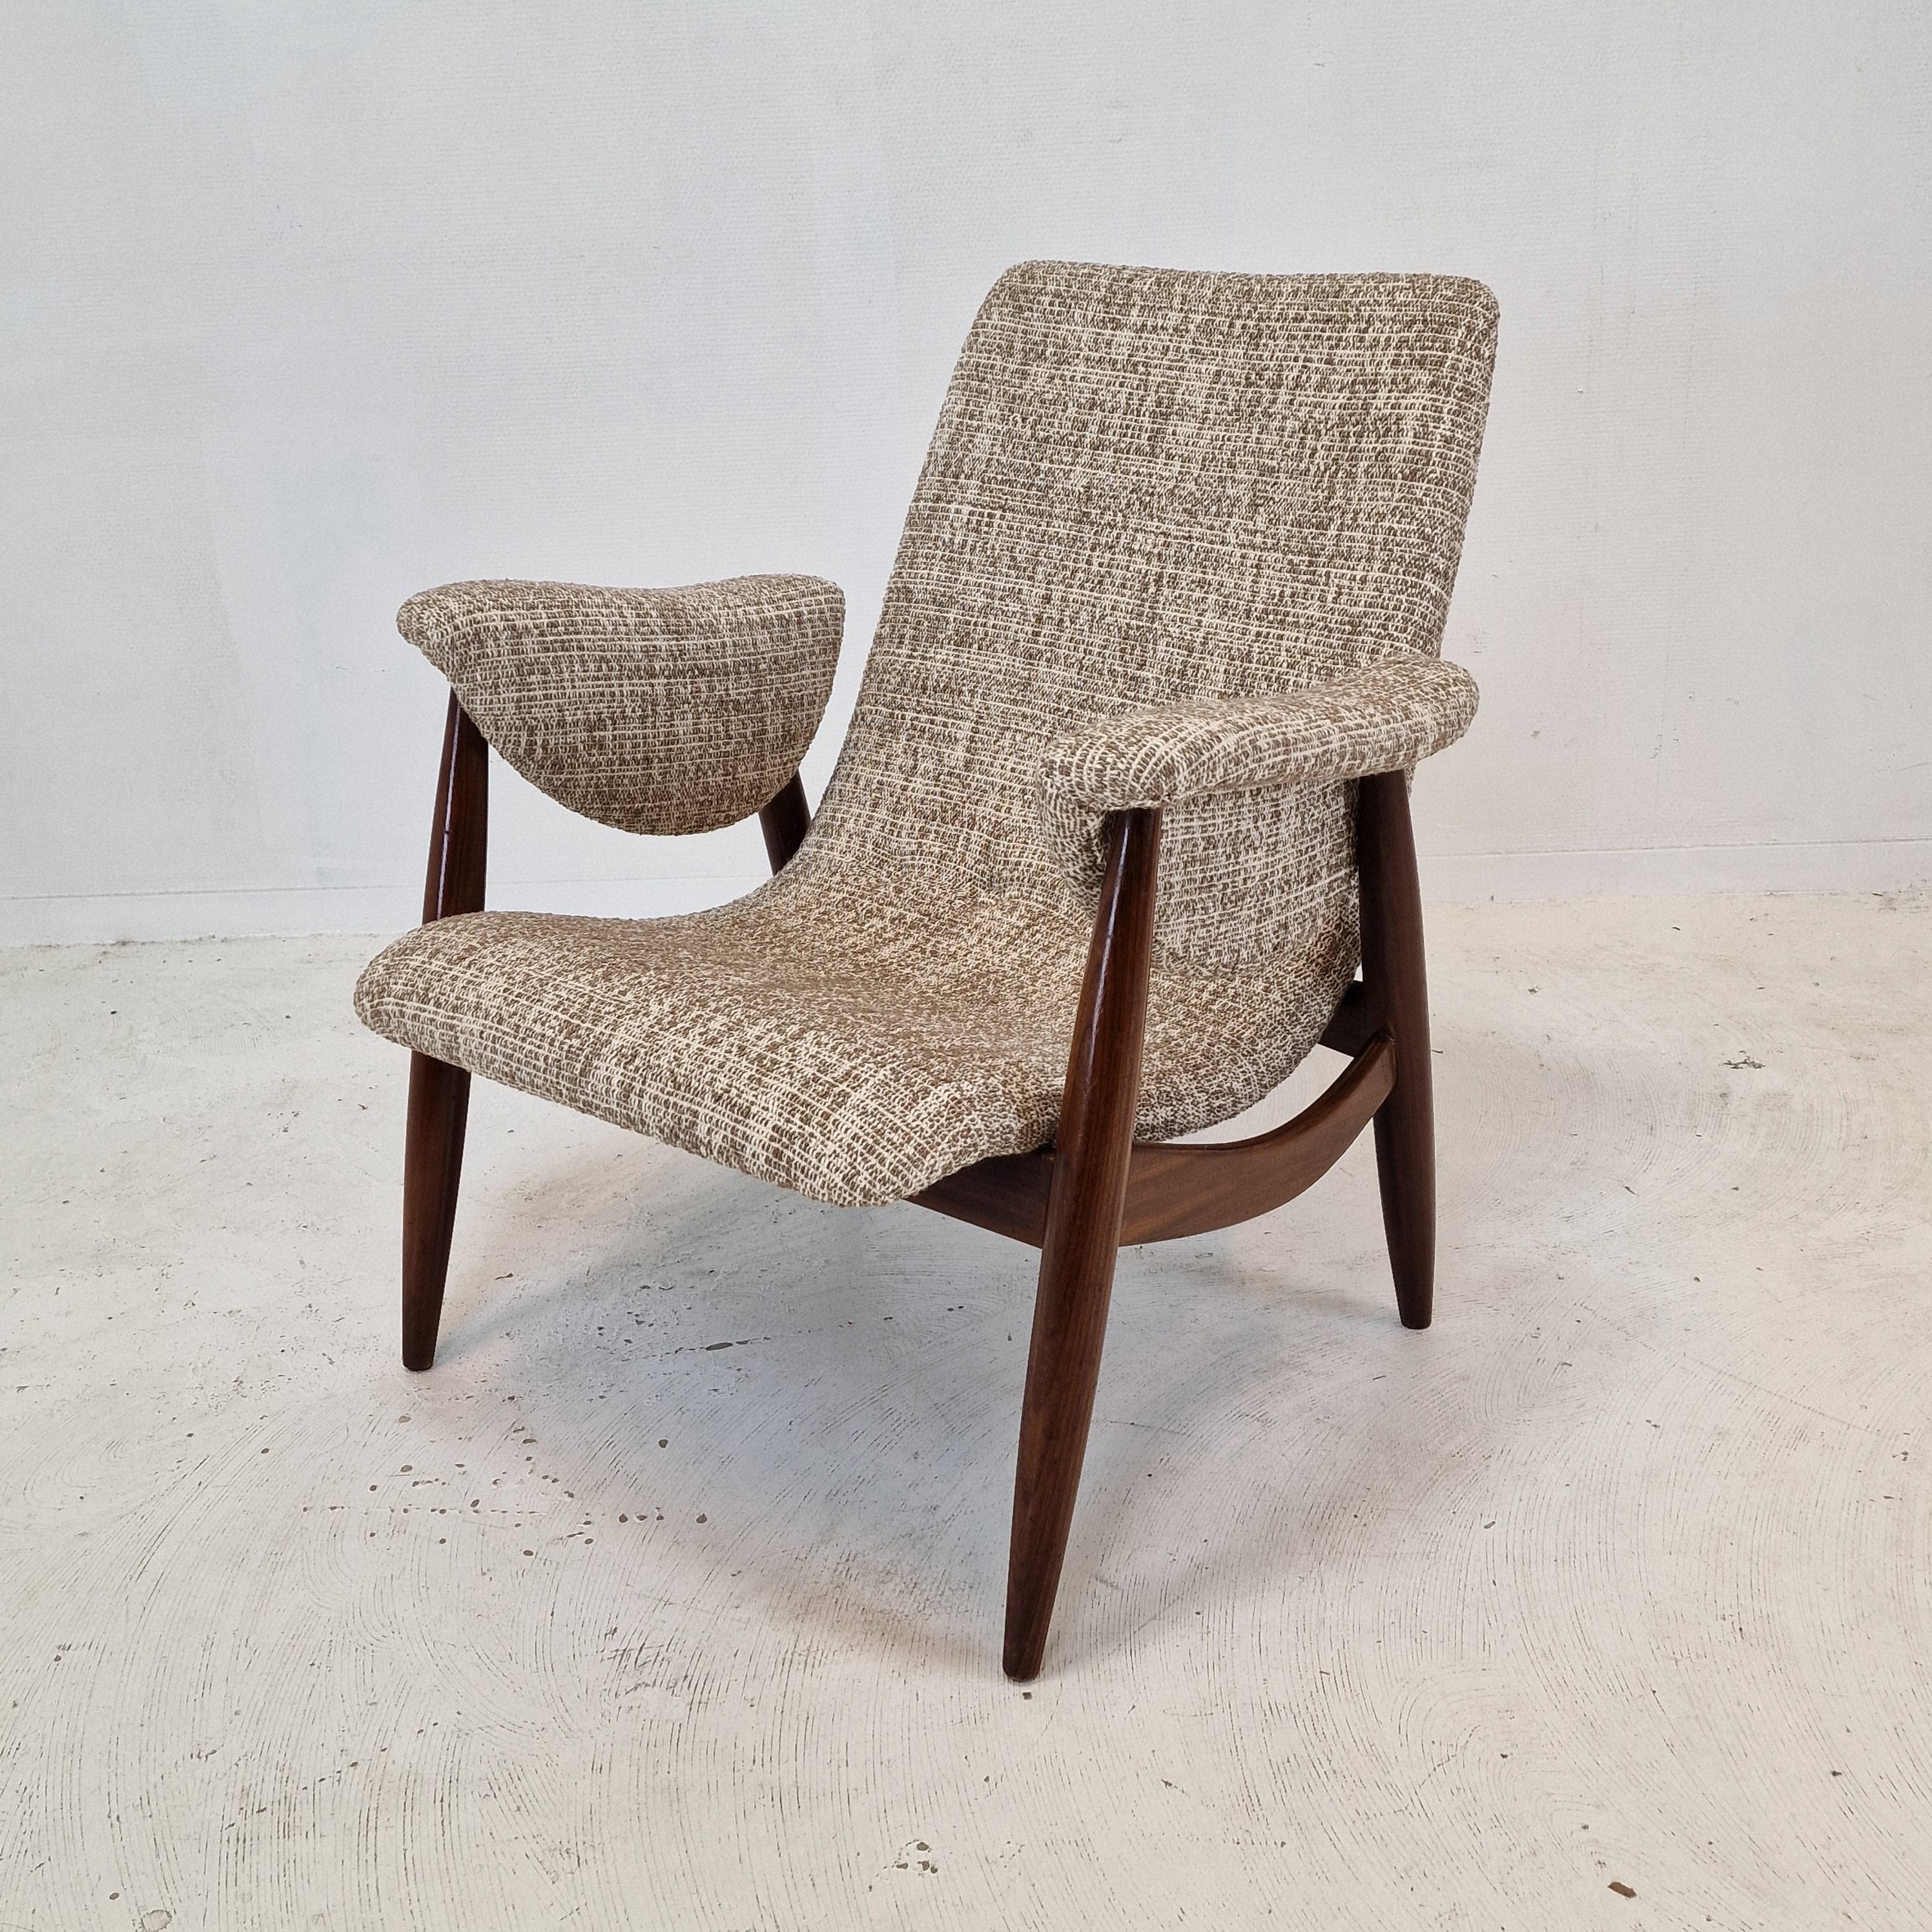 Lovely lounge chair, fabricated in the 1960s by Wébé the Netherlands.
It is designed by Louis van Teeffelen.

The elegant structure of this comfortable chair is made of solid teak.

The chair is just restored with new foam and new fabric.
It